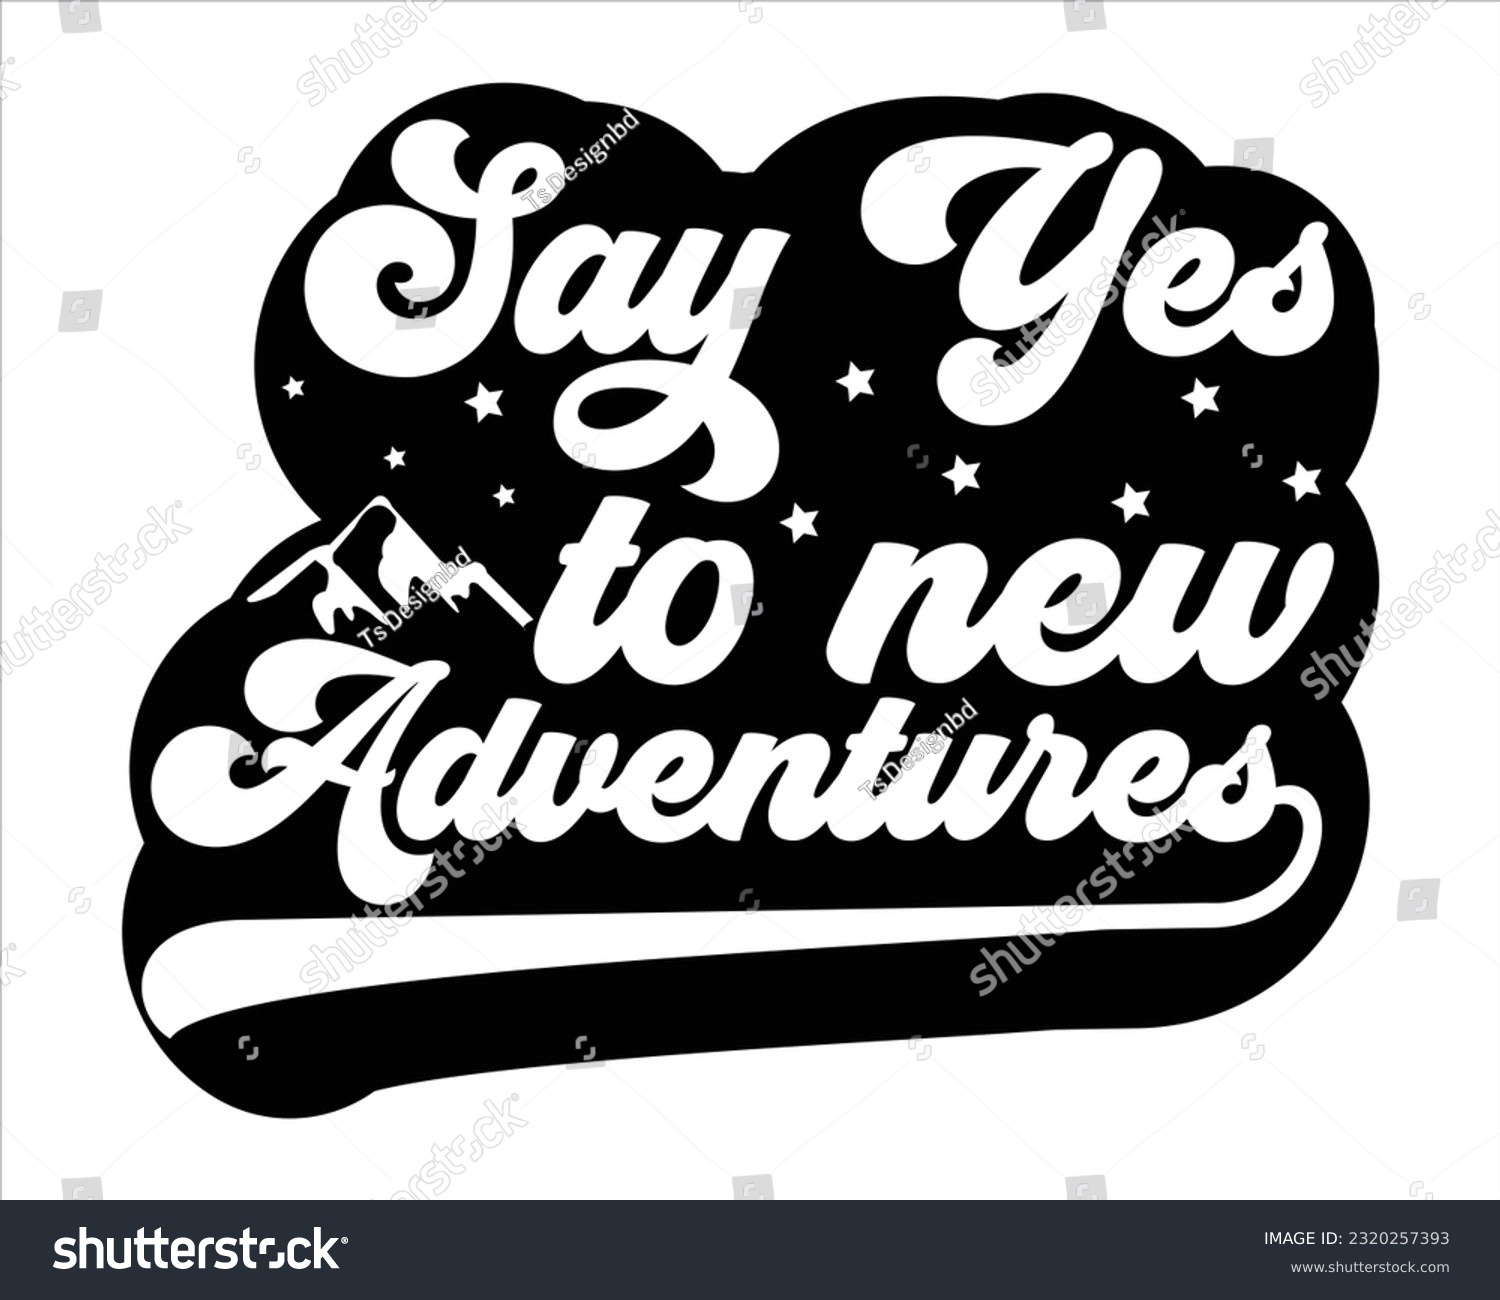 SVG of Say Yes  To New Adventures Svg Design, Hiking Svg Design, Mountain illustration, outdoor adventure ,Outdoor Adventure Inspiring Motivation Quote, camping, hiking svg